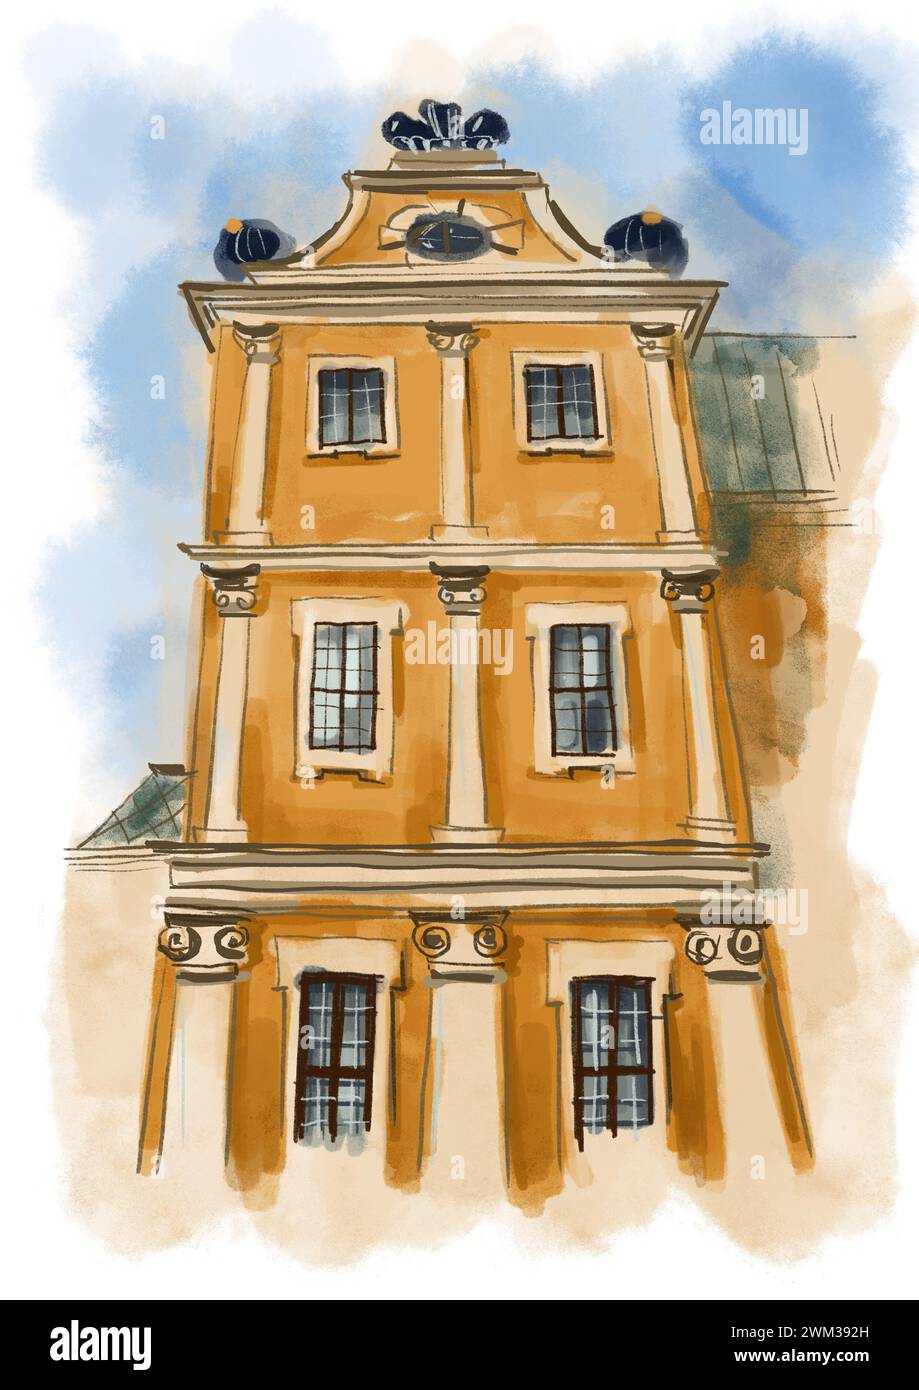 Building with columns, windows and pediment. Classic architectural style. Watercolor digital illustration, sketch Stock Photo